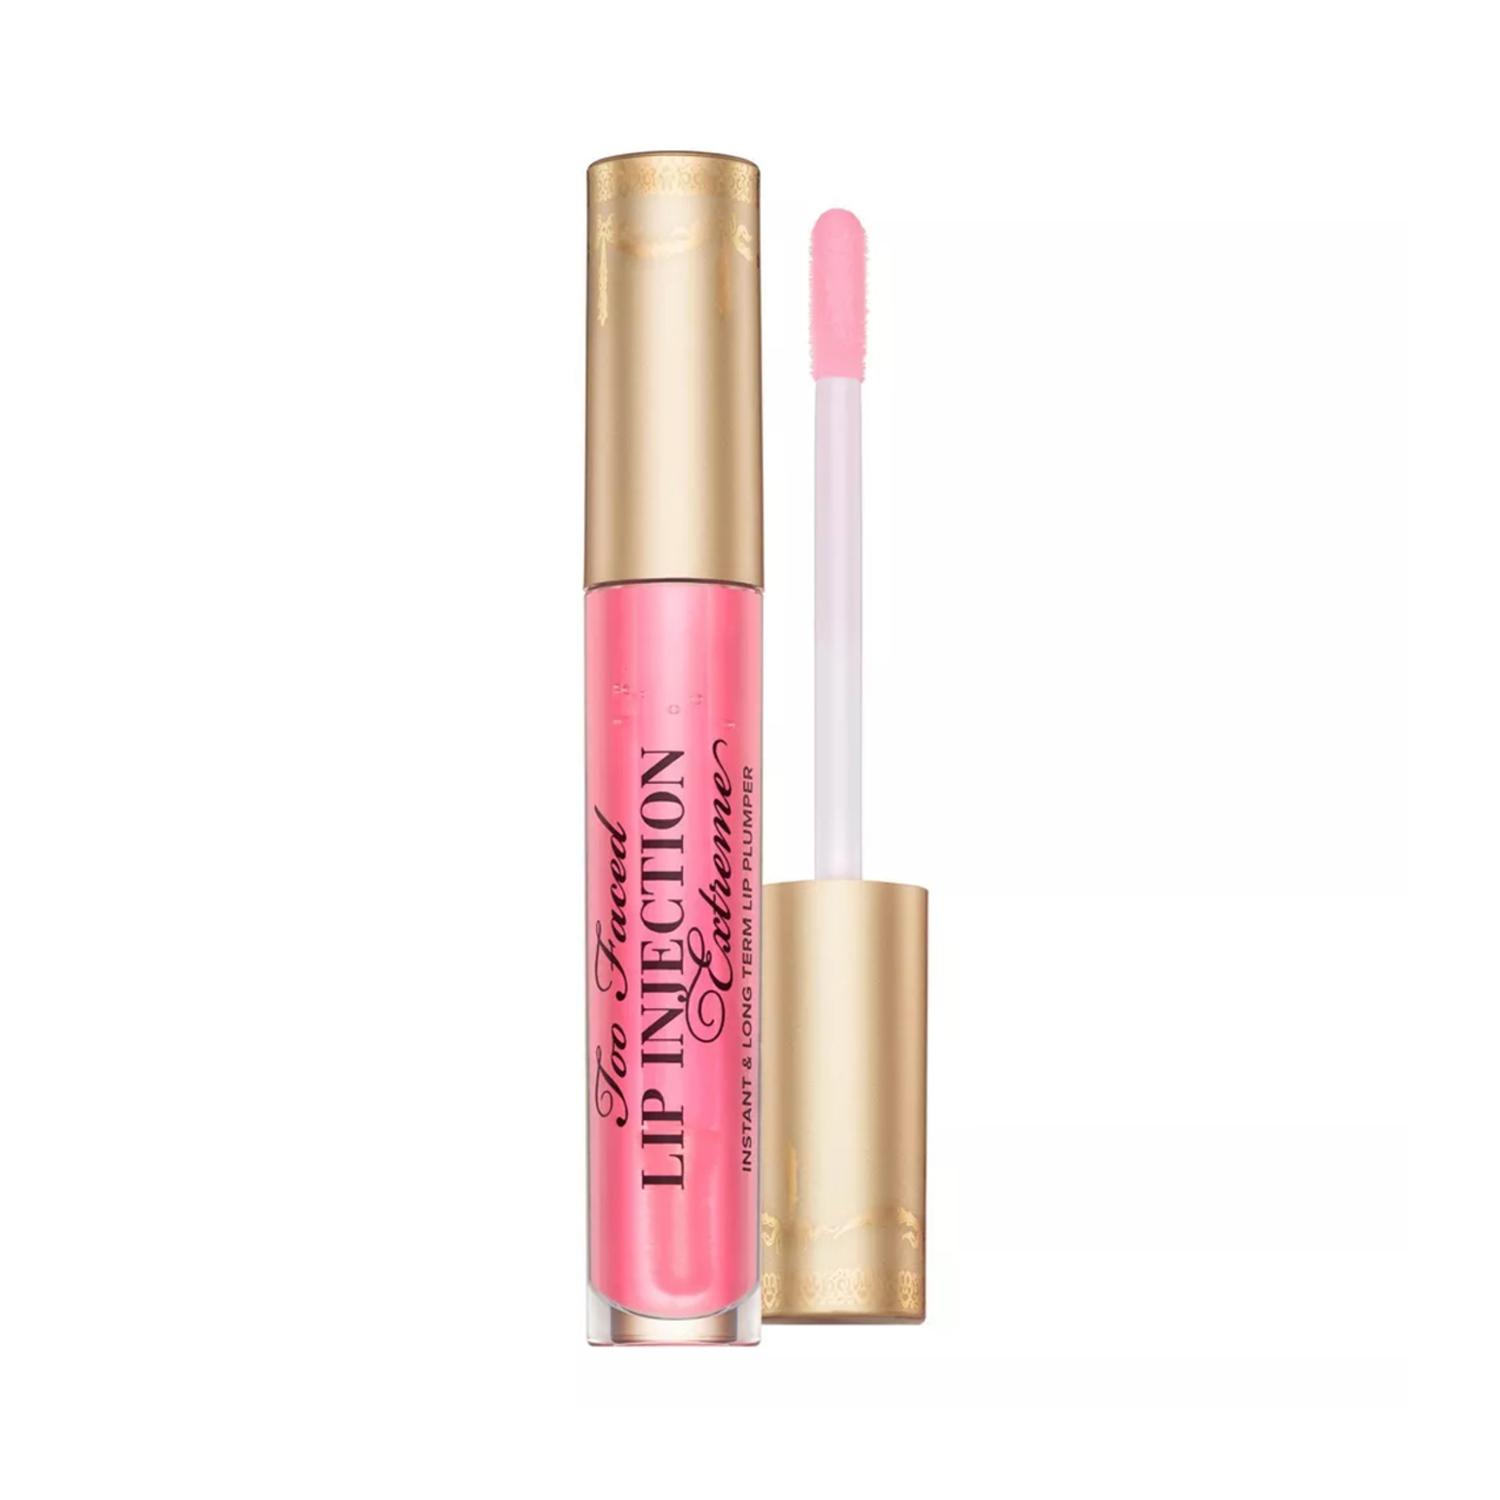 Too Faced Lip Injection Maximum Plump Lip Plumper - Creamsicle Tickle (4g)